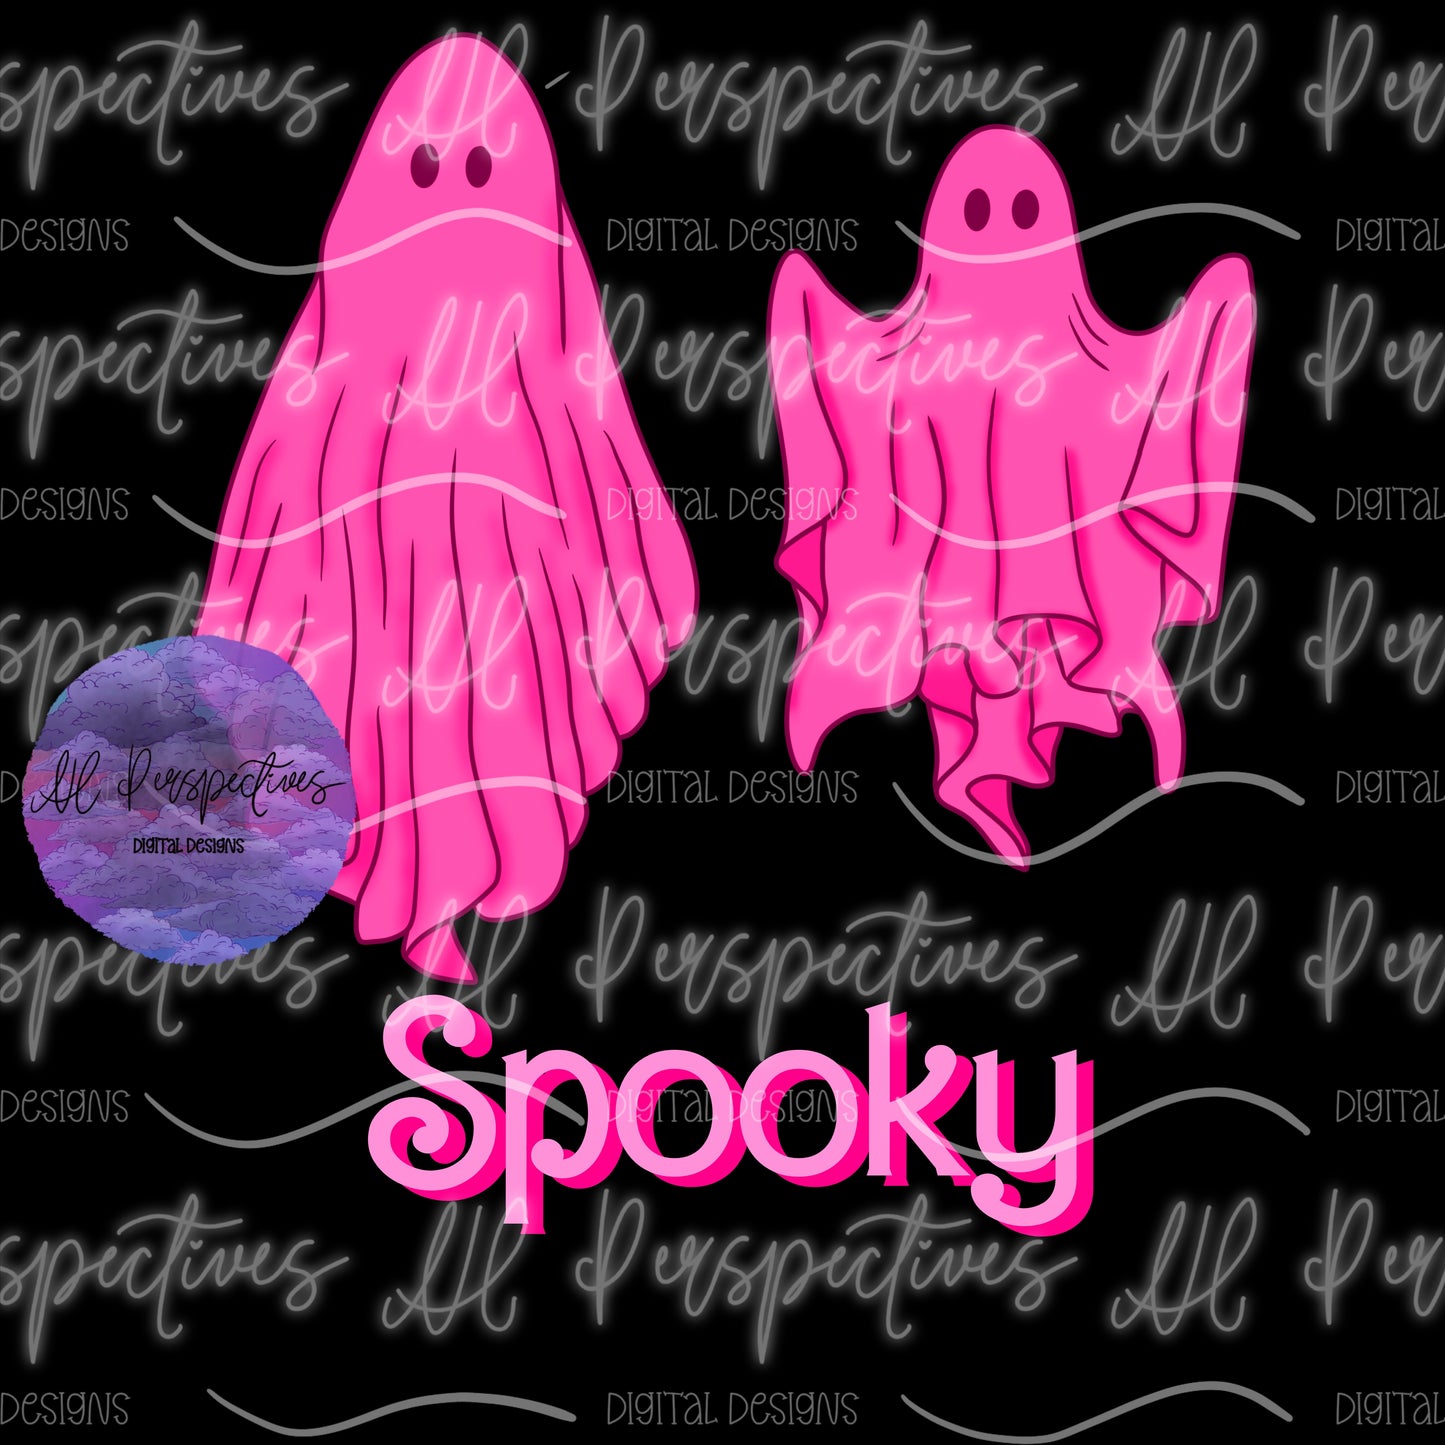 Pink Ghosts